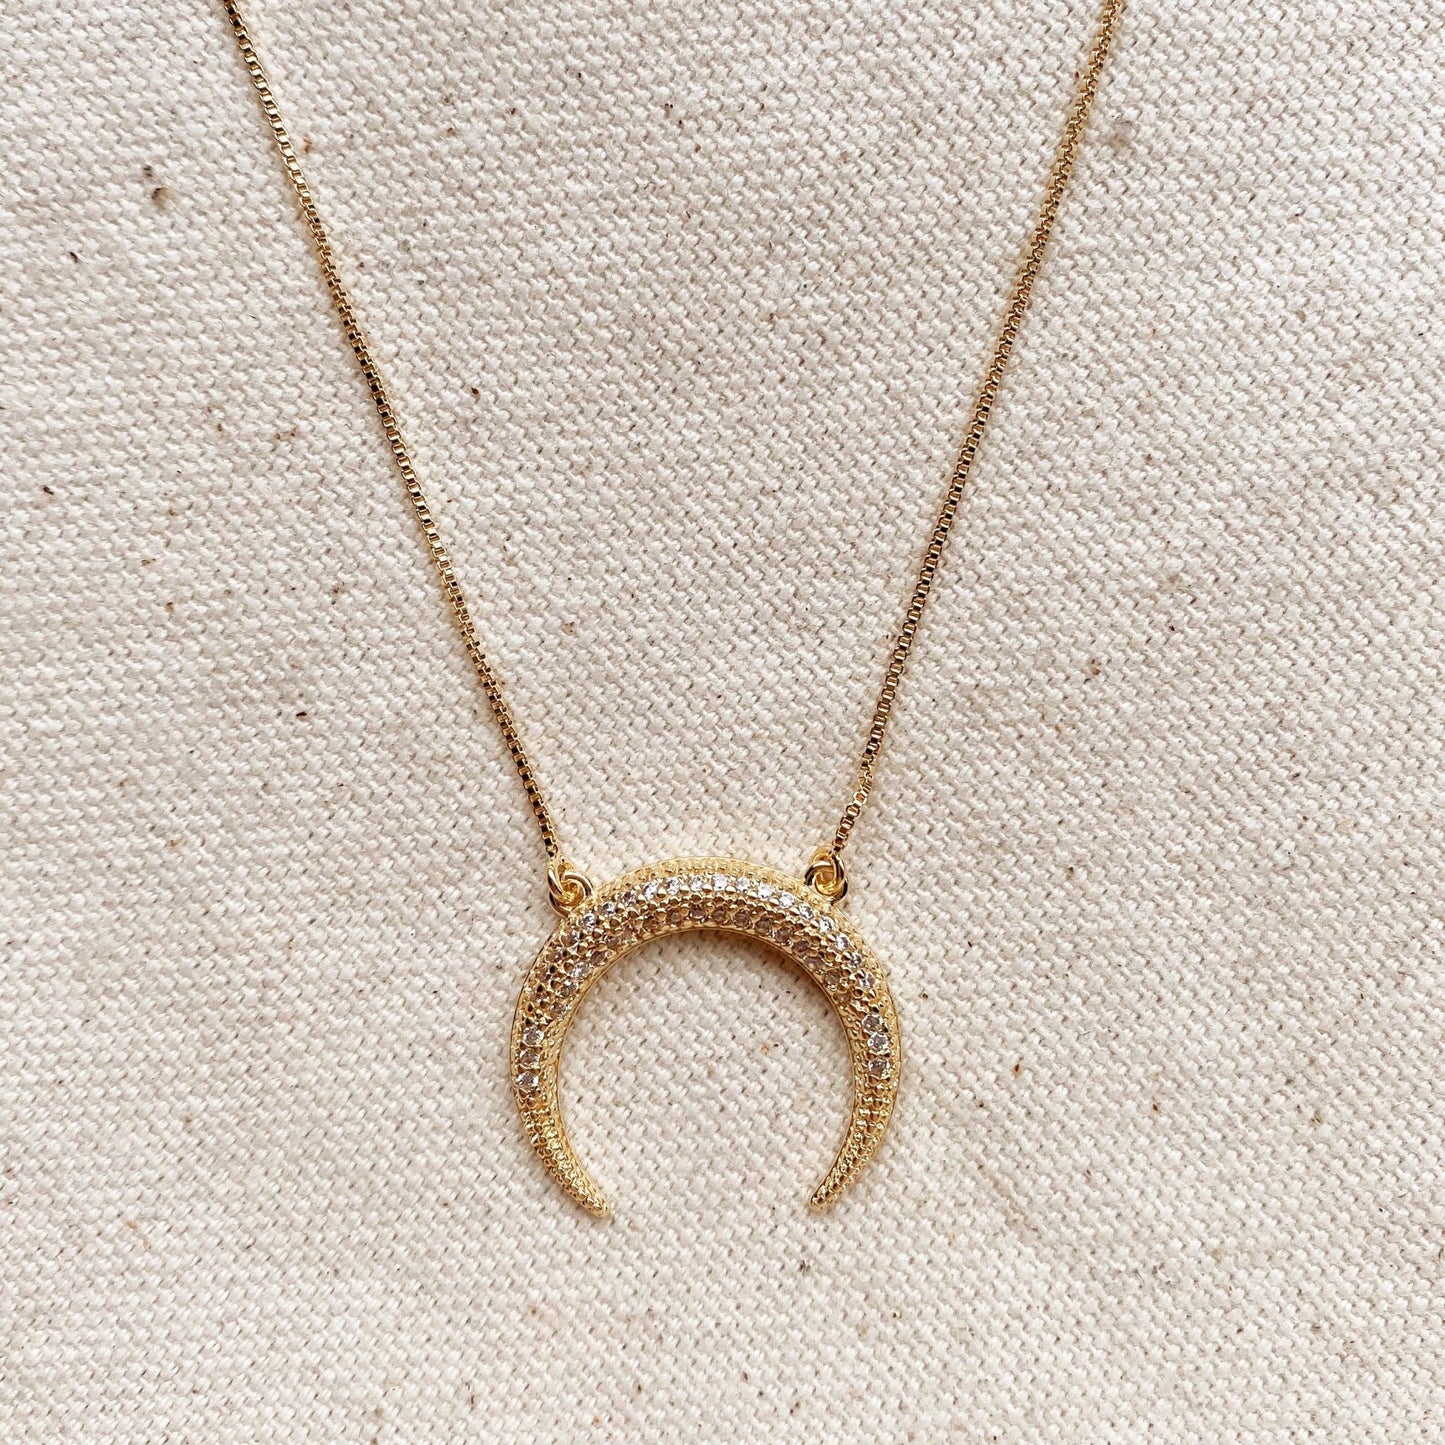 Cubic Zirconia 18k Gold Filled Crescent Moon Necklace - FOREVERLINKX